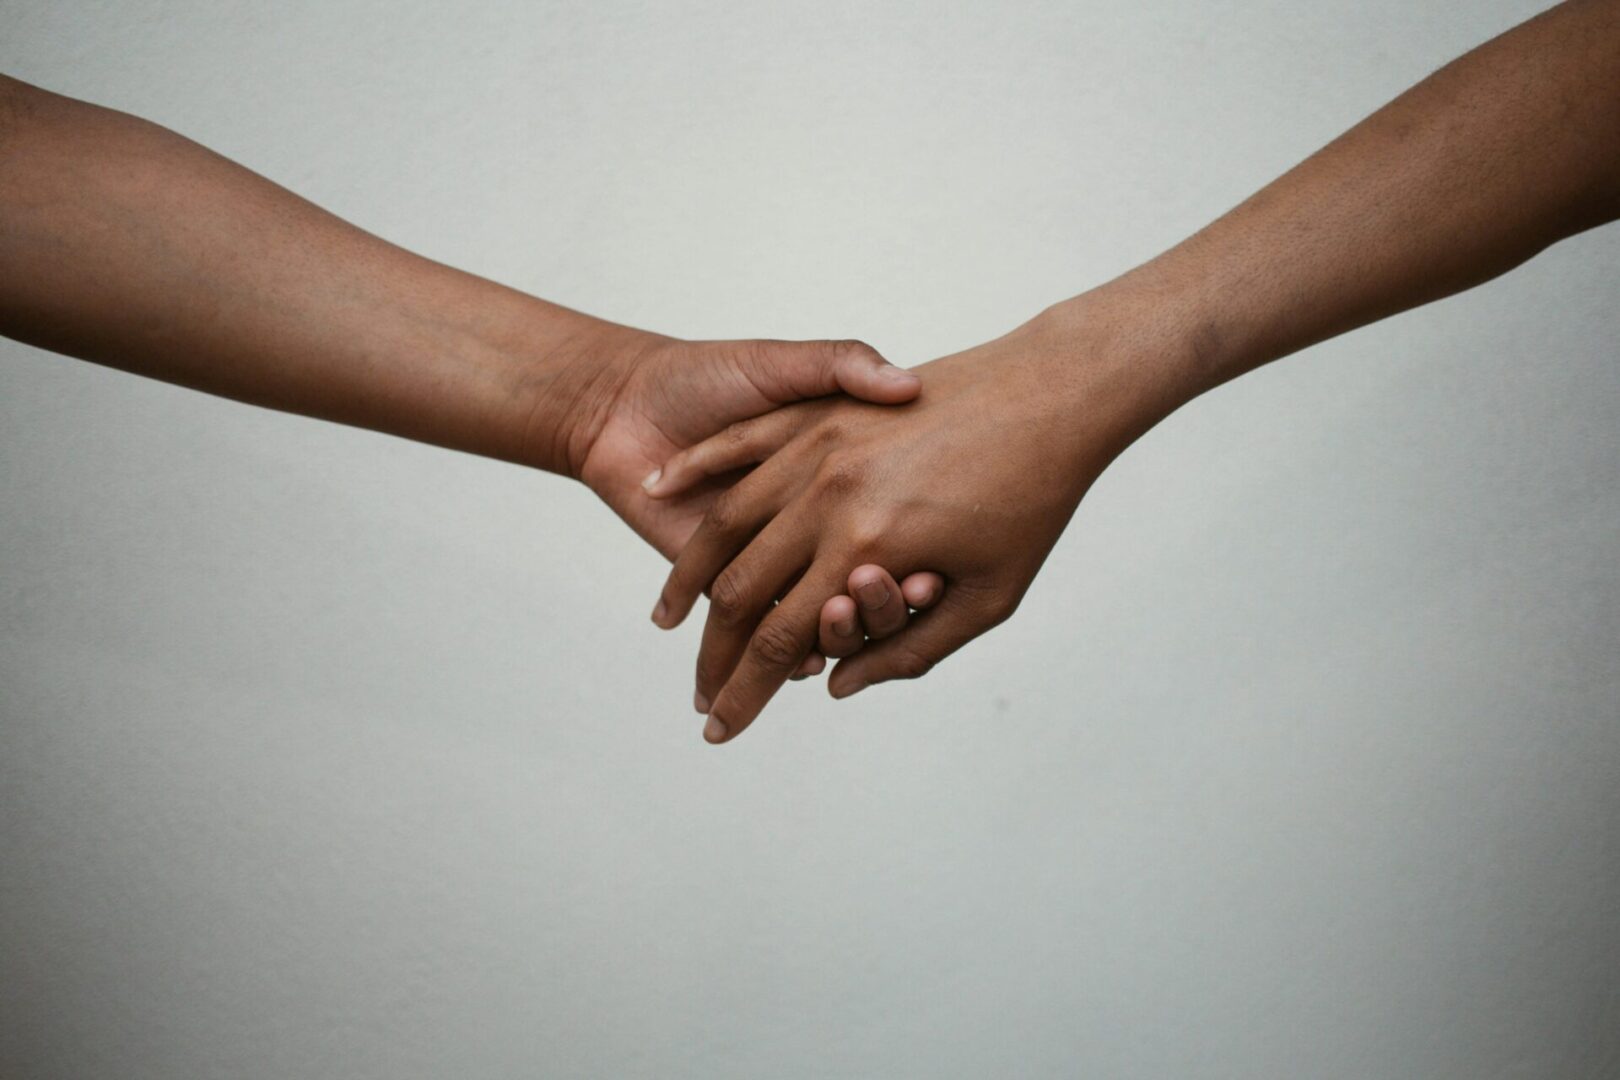 Two hands holding each other